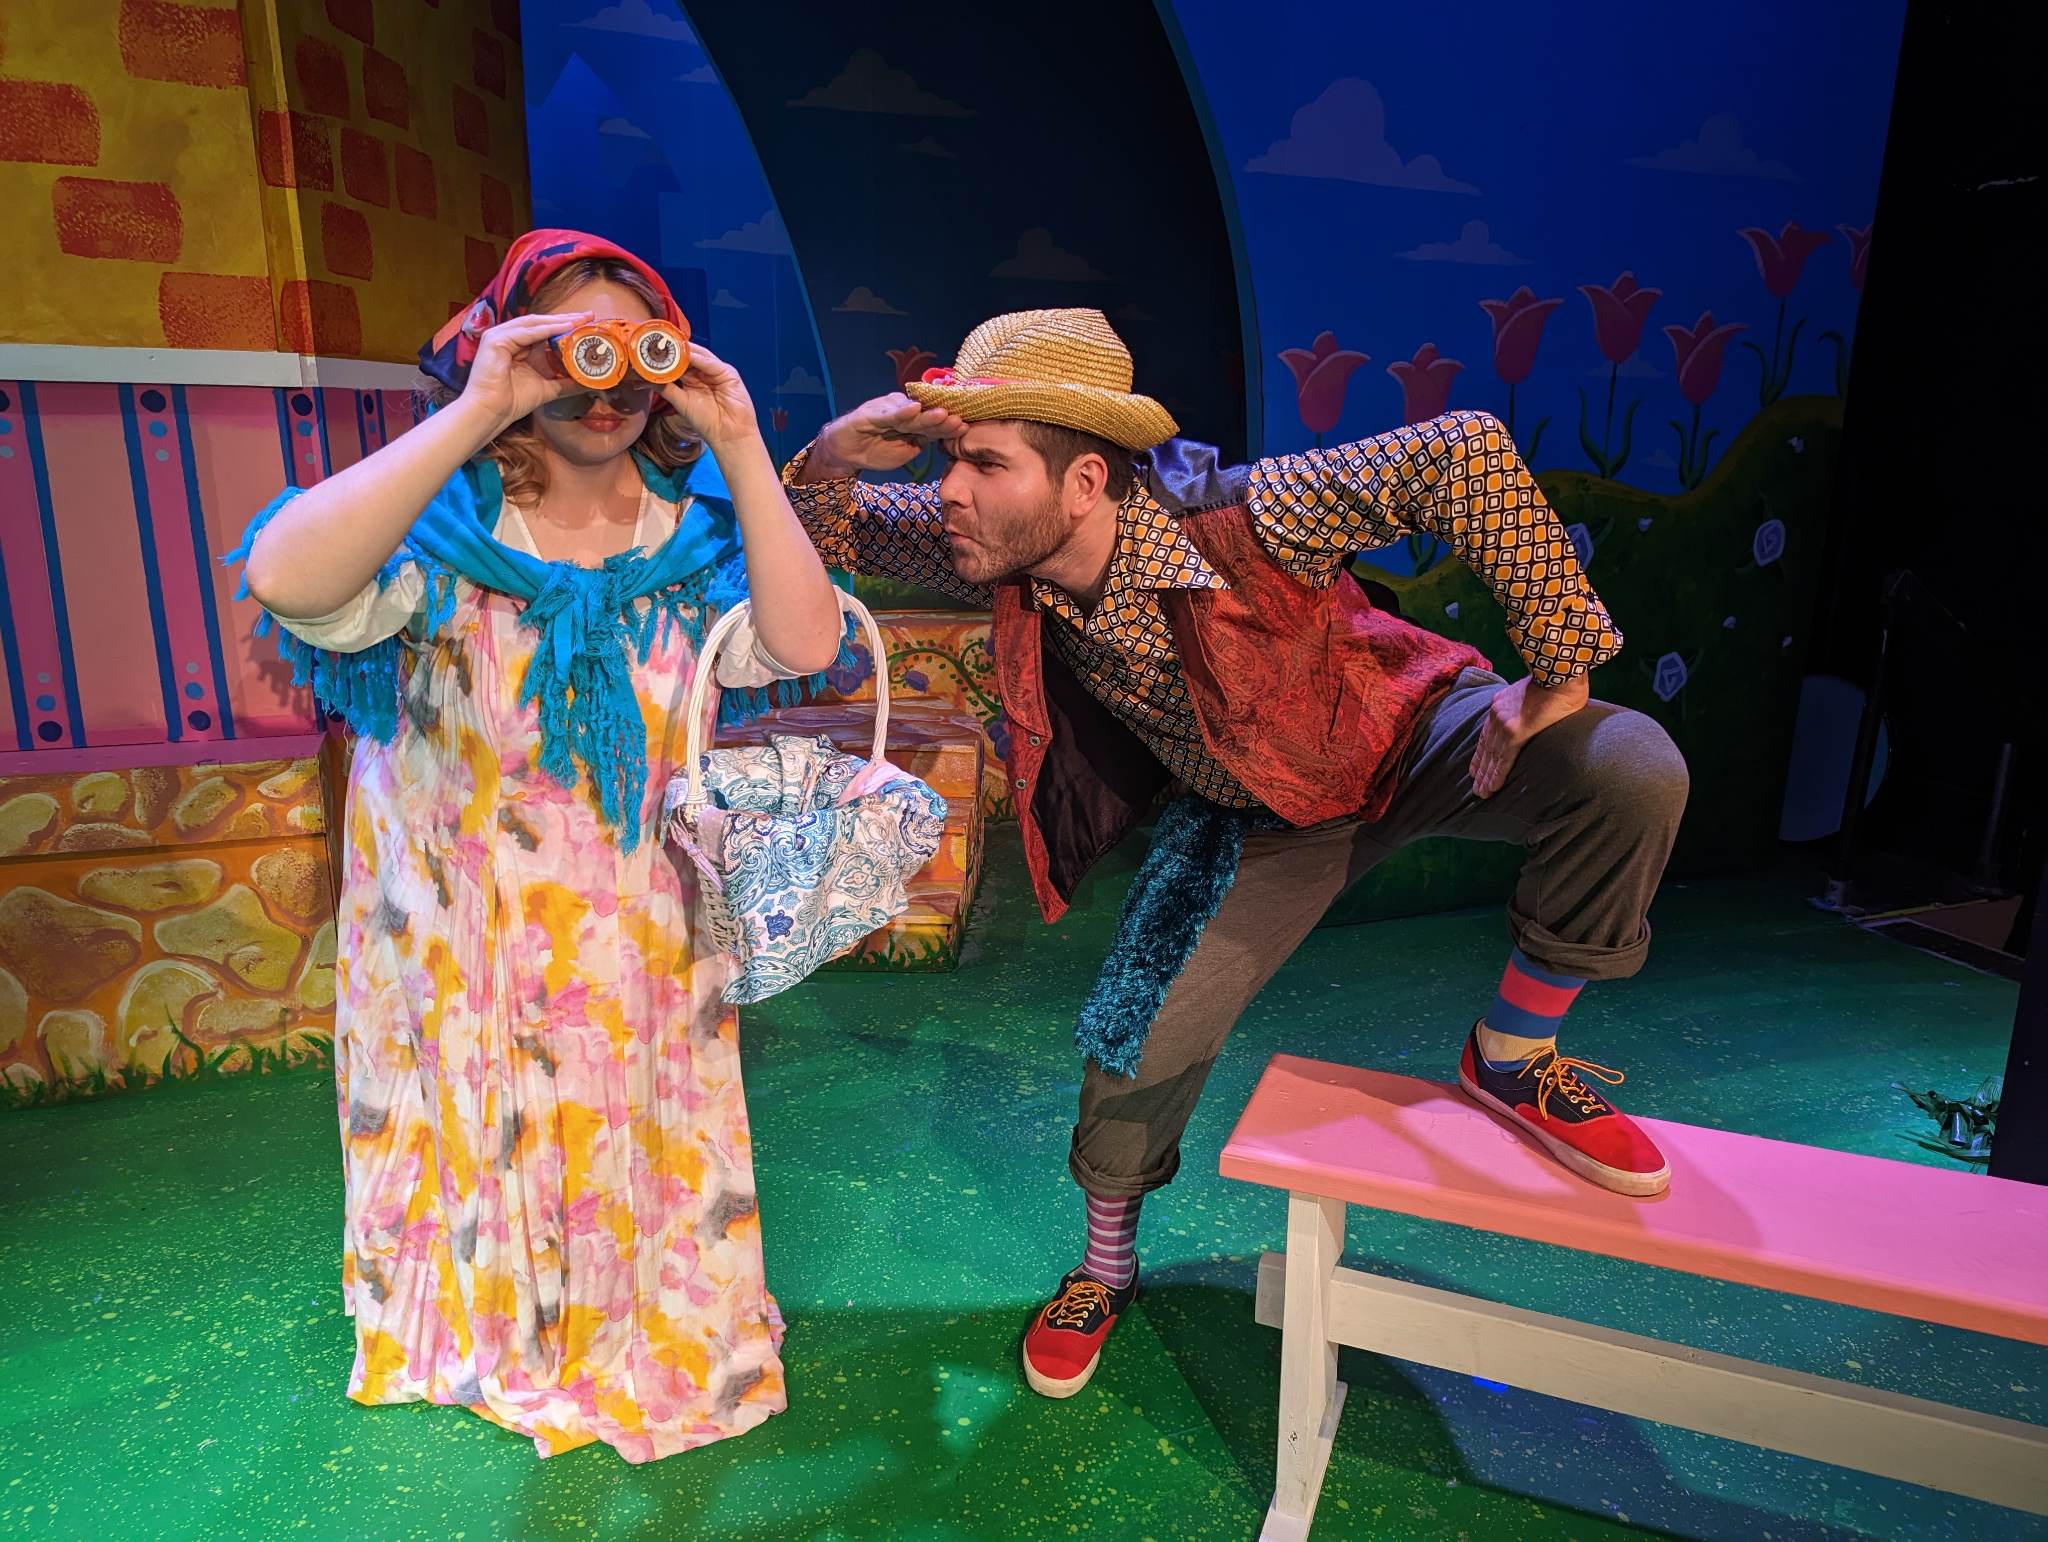 Mary (Maria Hefte) and Eric (Stephen Denning) search for their long lost daughter Rapunzel.